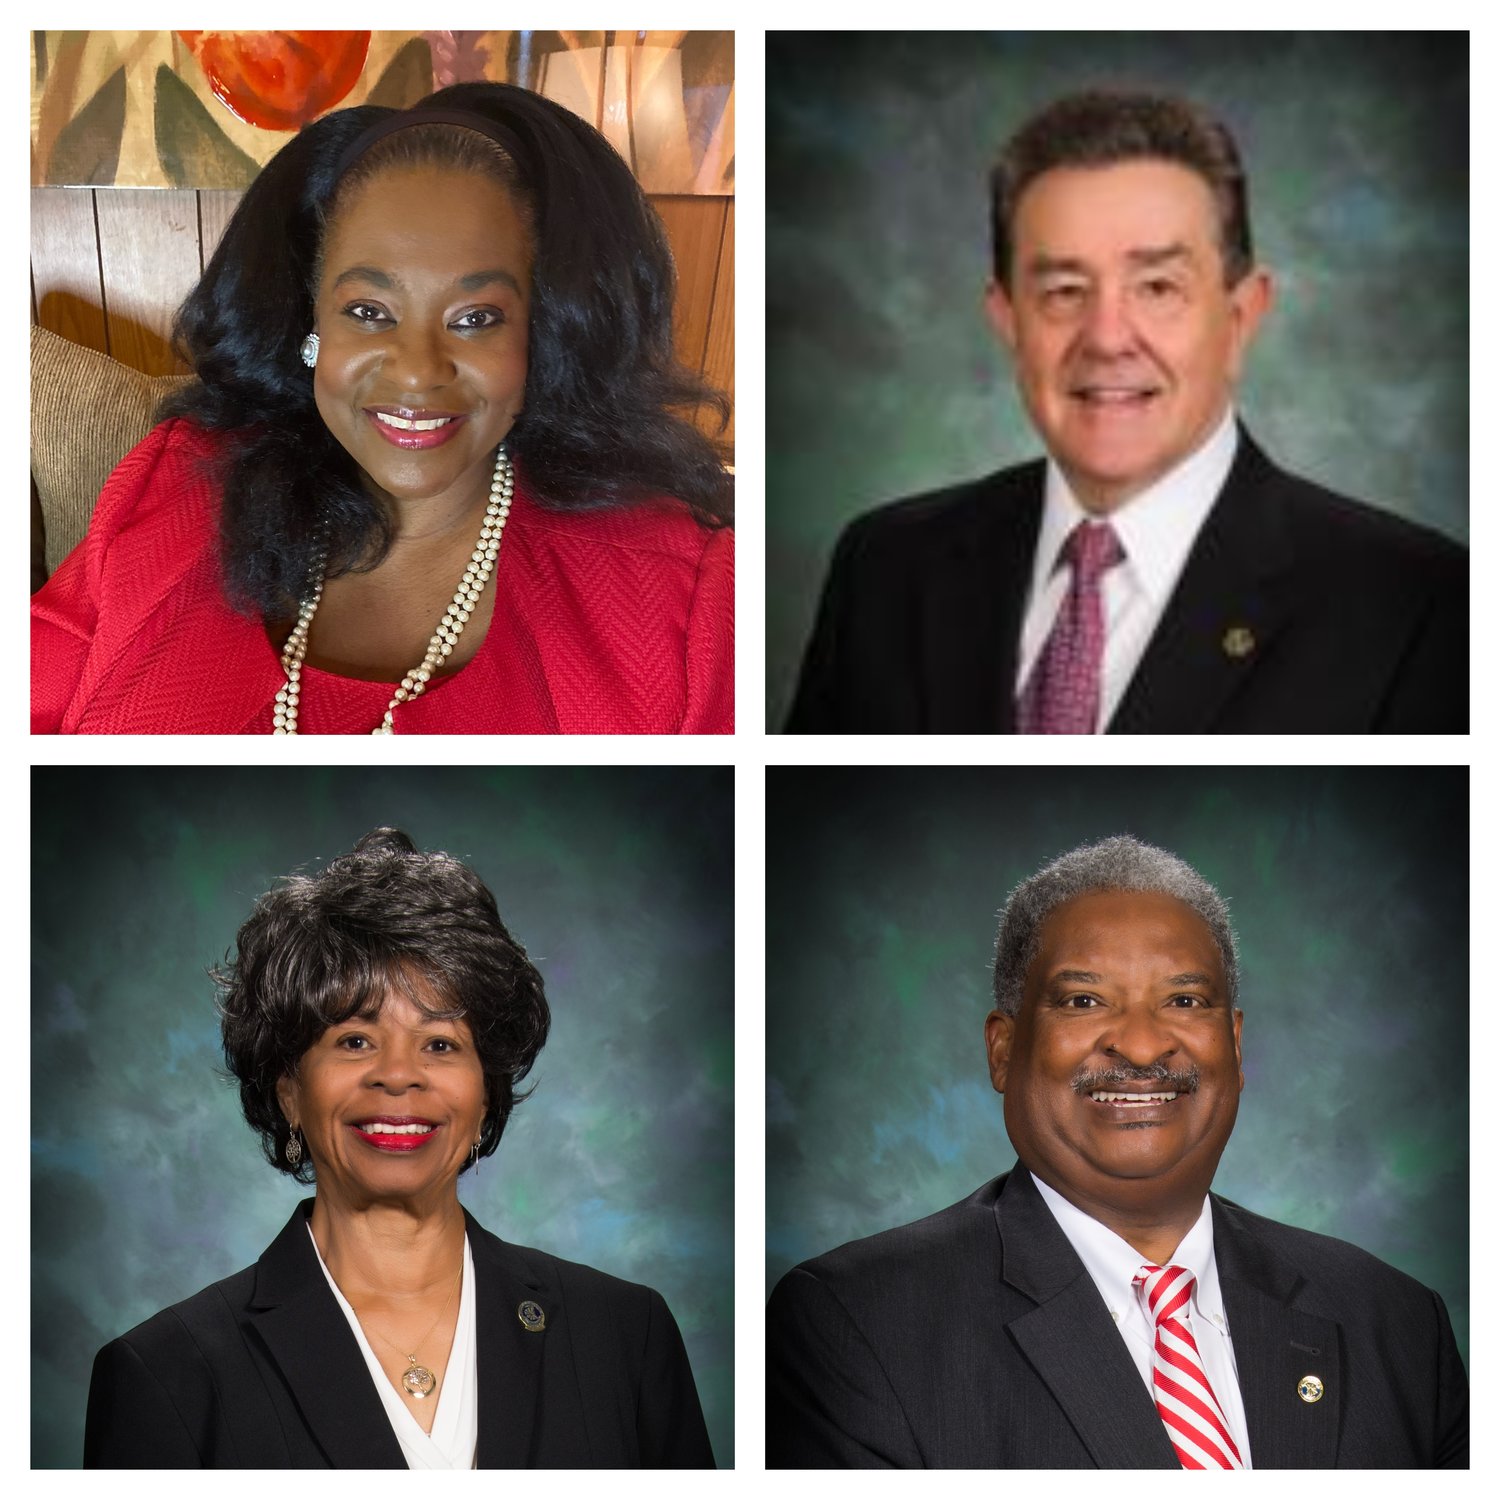 Commissioners-elect Veronica Jones and Marshall Faircloth and Commissioners Jeannette Council and Glenn Adams will take their oaths of office on Monday when the county Board of Commissioners meets at the Crown Coliseum Ballroom.